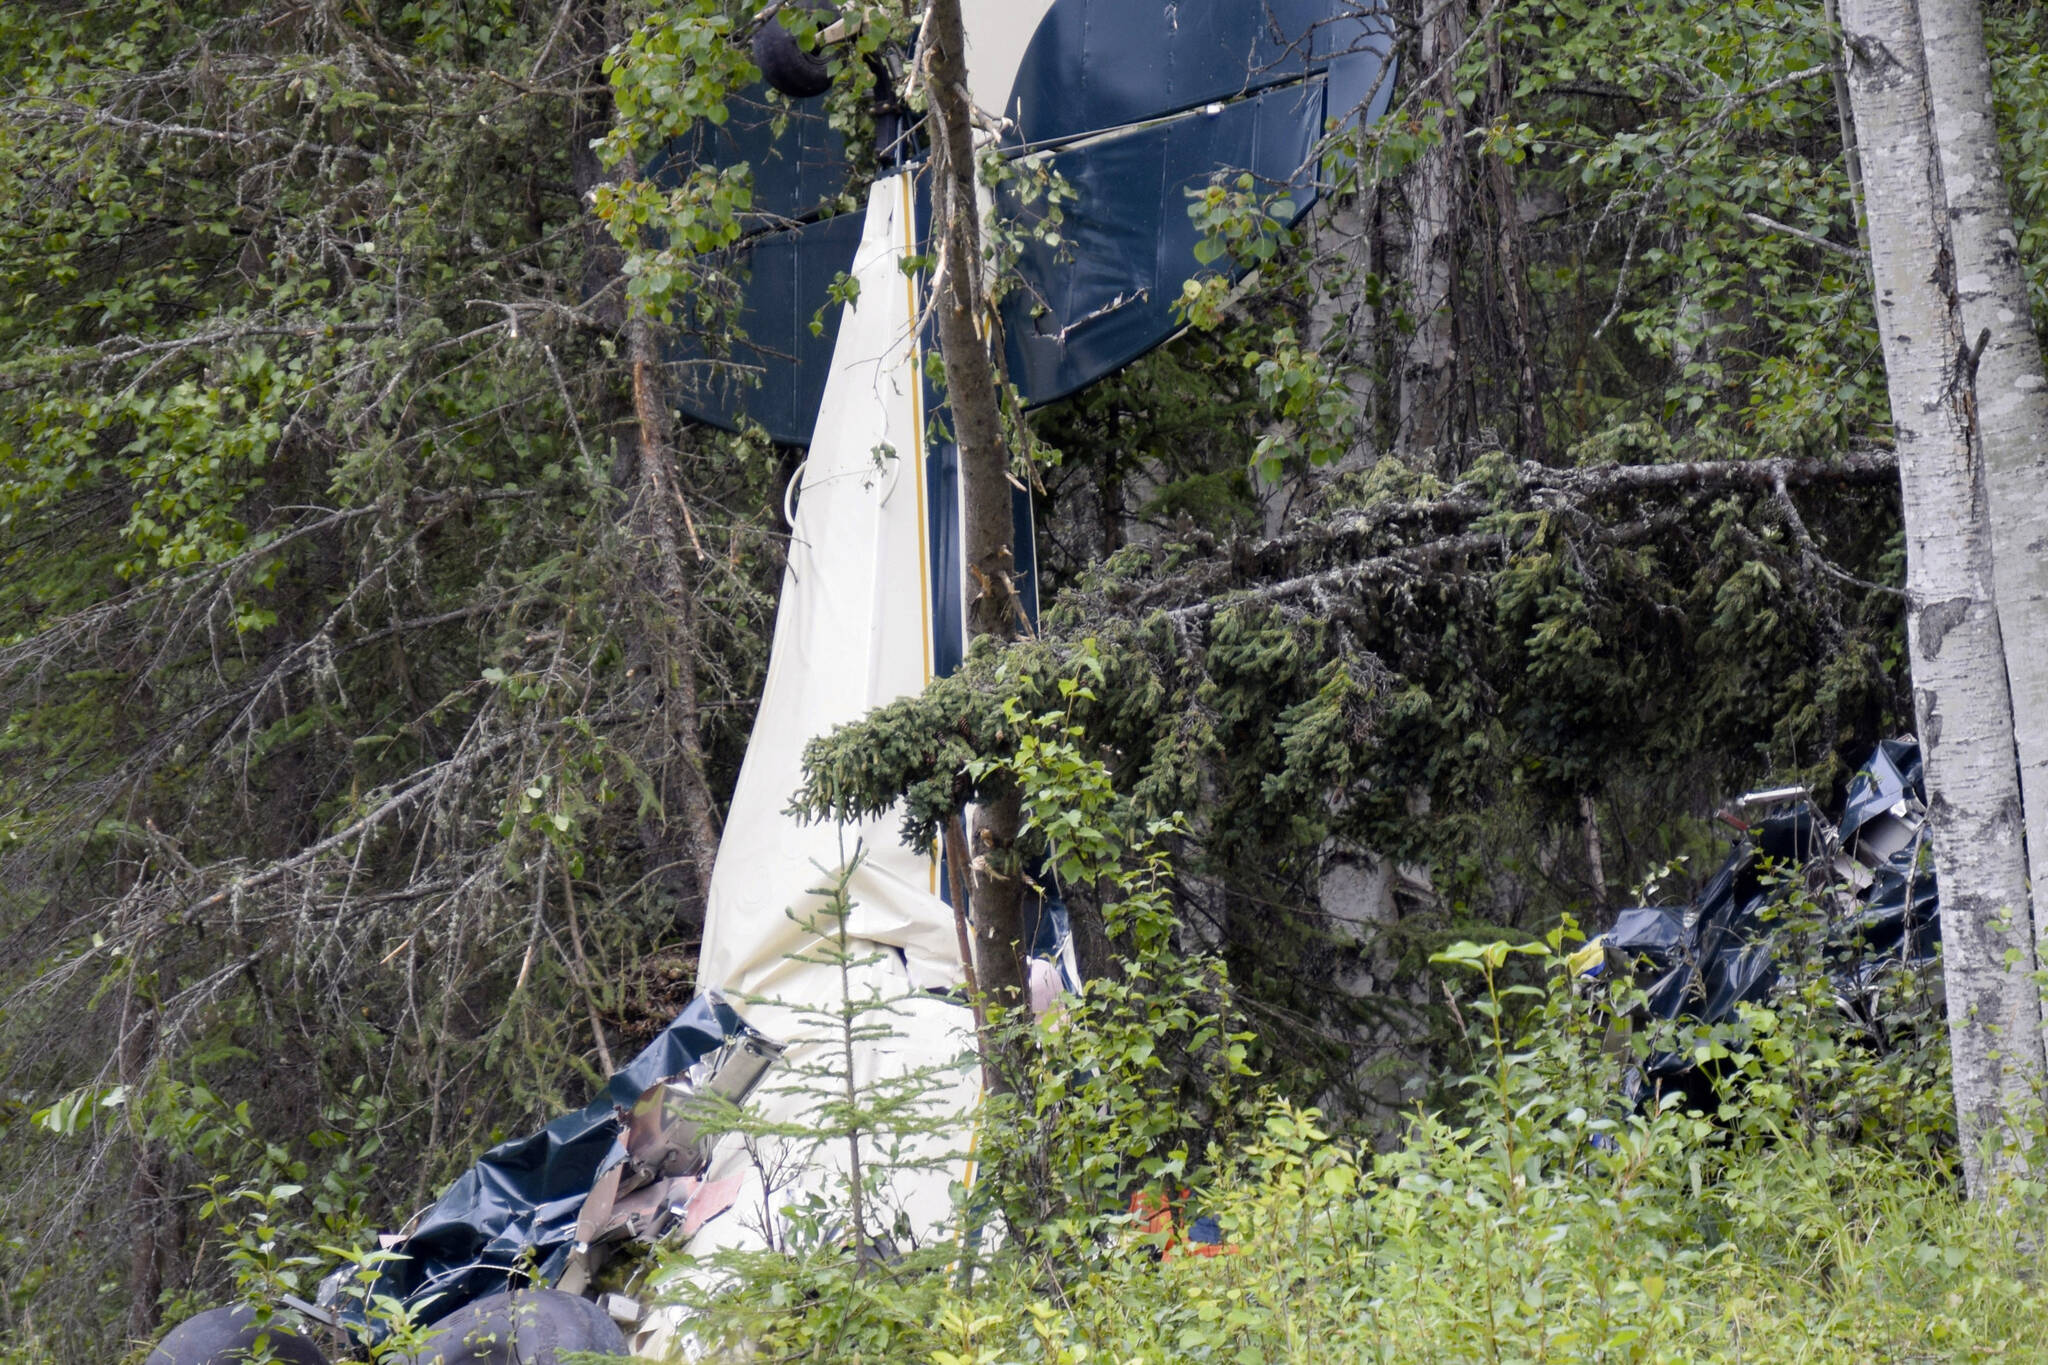 In this July 31, 2020, file photo, a plane rests in brush and trees outside of Soldotna, Alaska, after a midair collision that killed seven people, including State Rep. Gary Knopp. A Feb. 22 report by the National Transportation and Safety Board is recommending that all pilots be required to communicate their positions on a designated radio frequency when entering and exiting areas not controlled by air traffic control towers throughout Alaska. (Jeff Helminiak/Peninsula Clarion via AP, F-le)